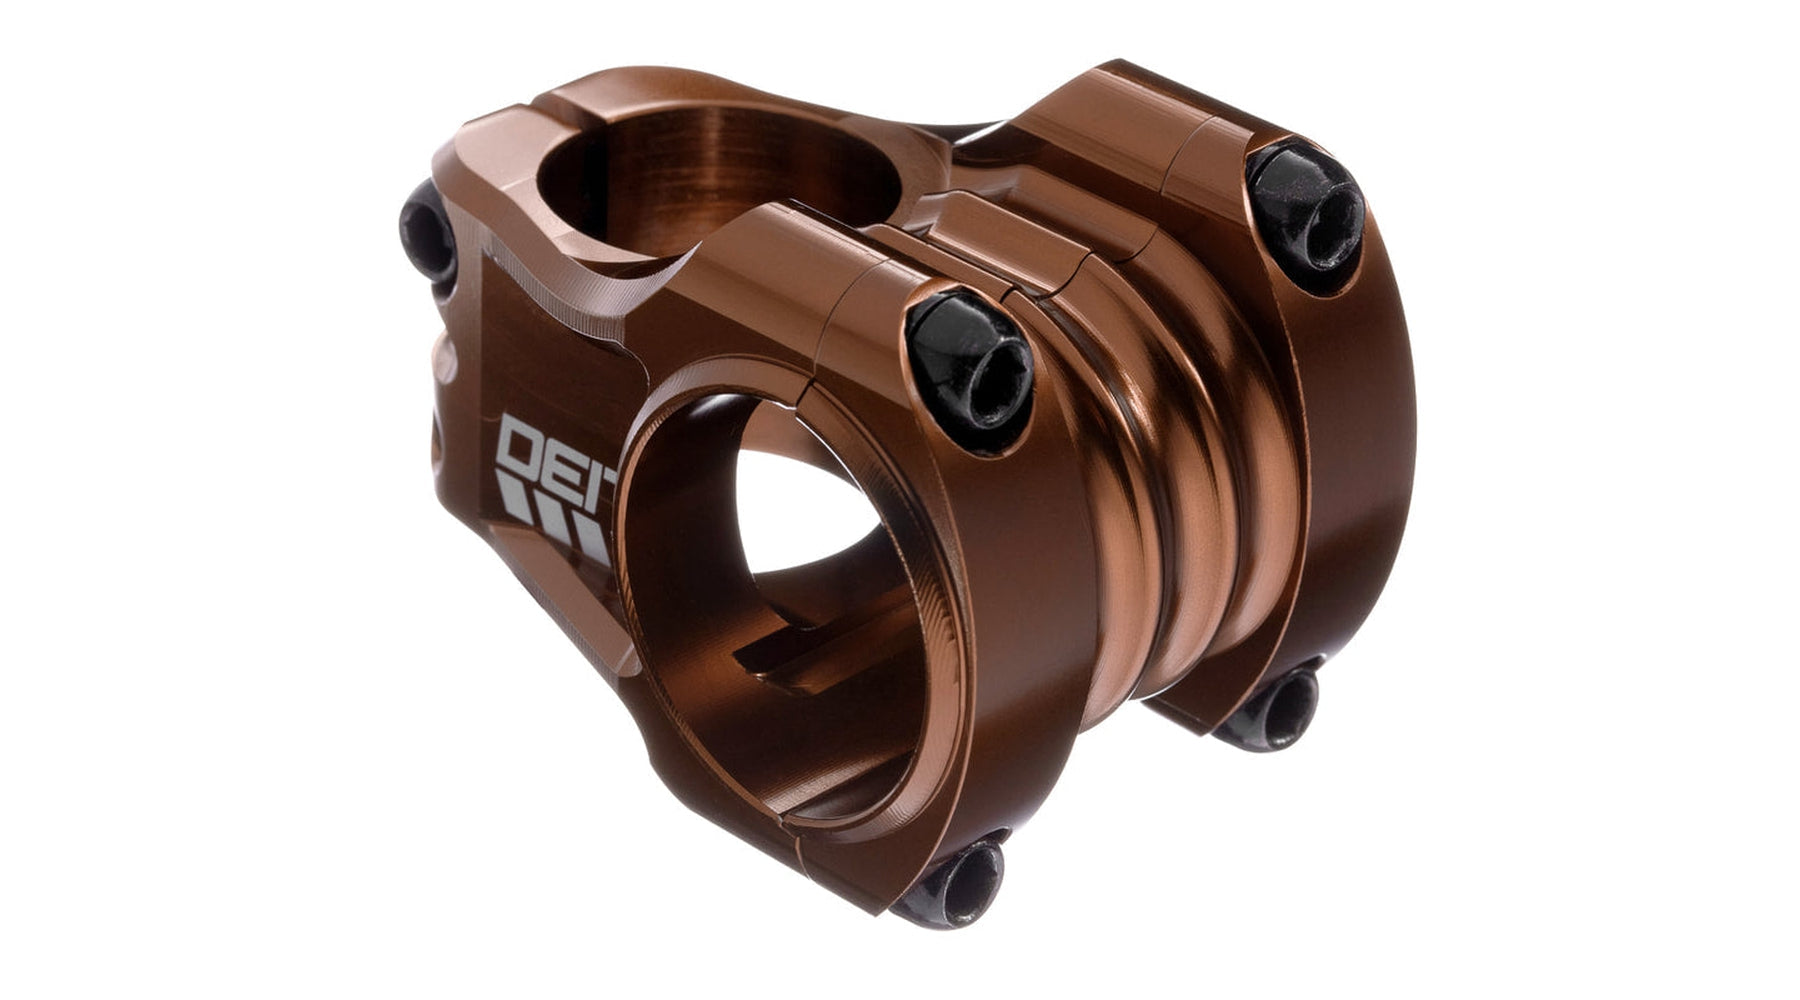 Deity Copperhead Stems | completecyclist - ​By popular demand, the Copperhead 35/OS MTB Stem has finally arrived! You begged us for a larger 35mm bore counterpart to the beloved award winning Copperhead